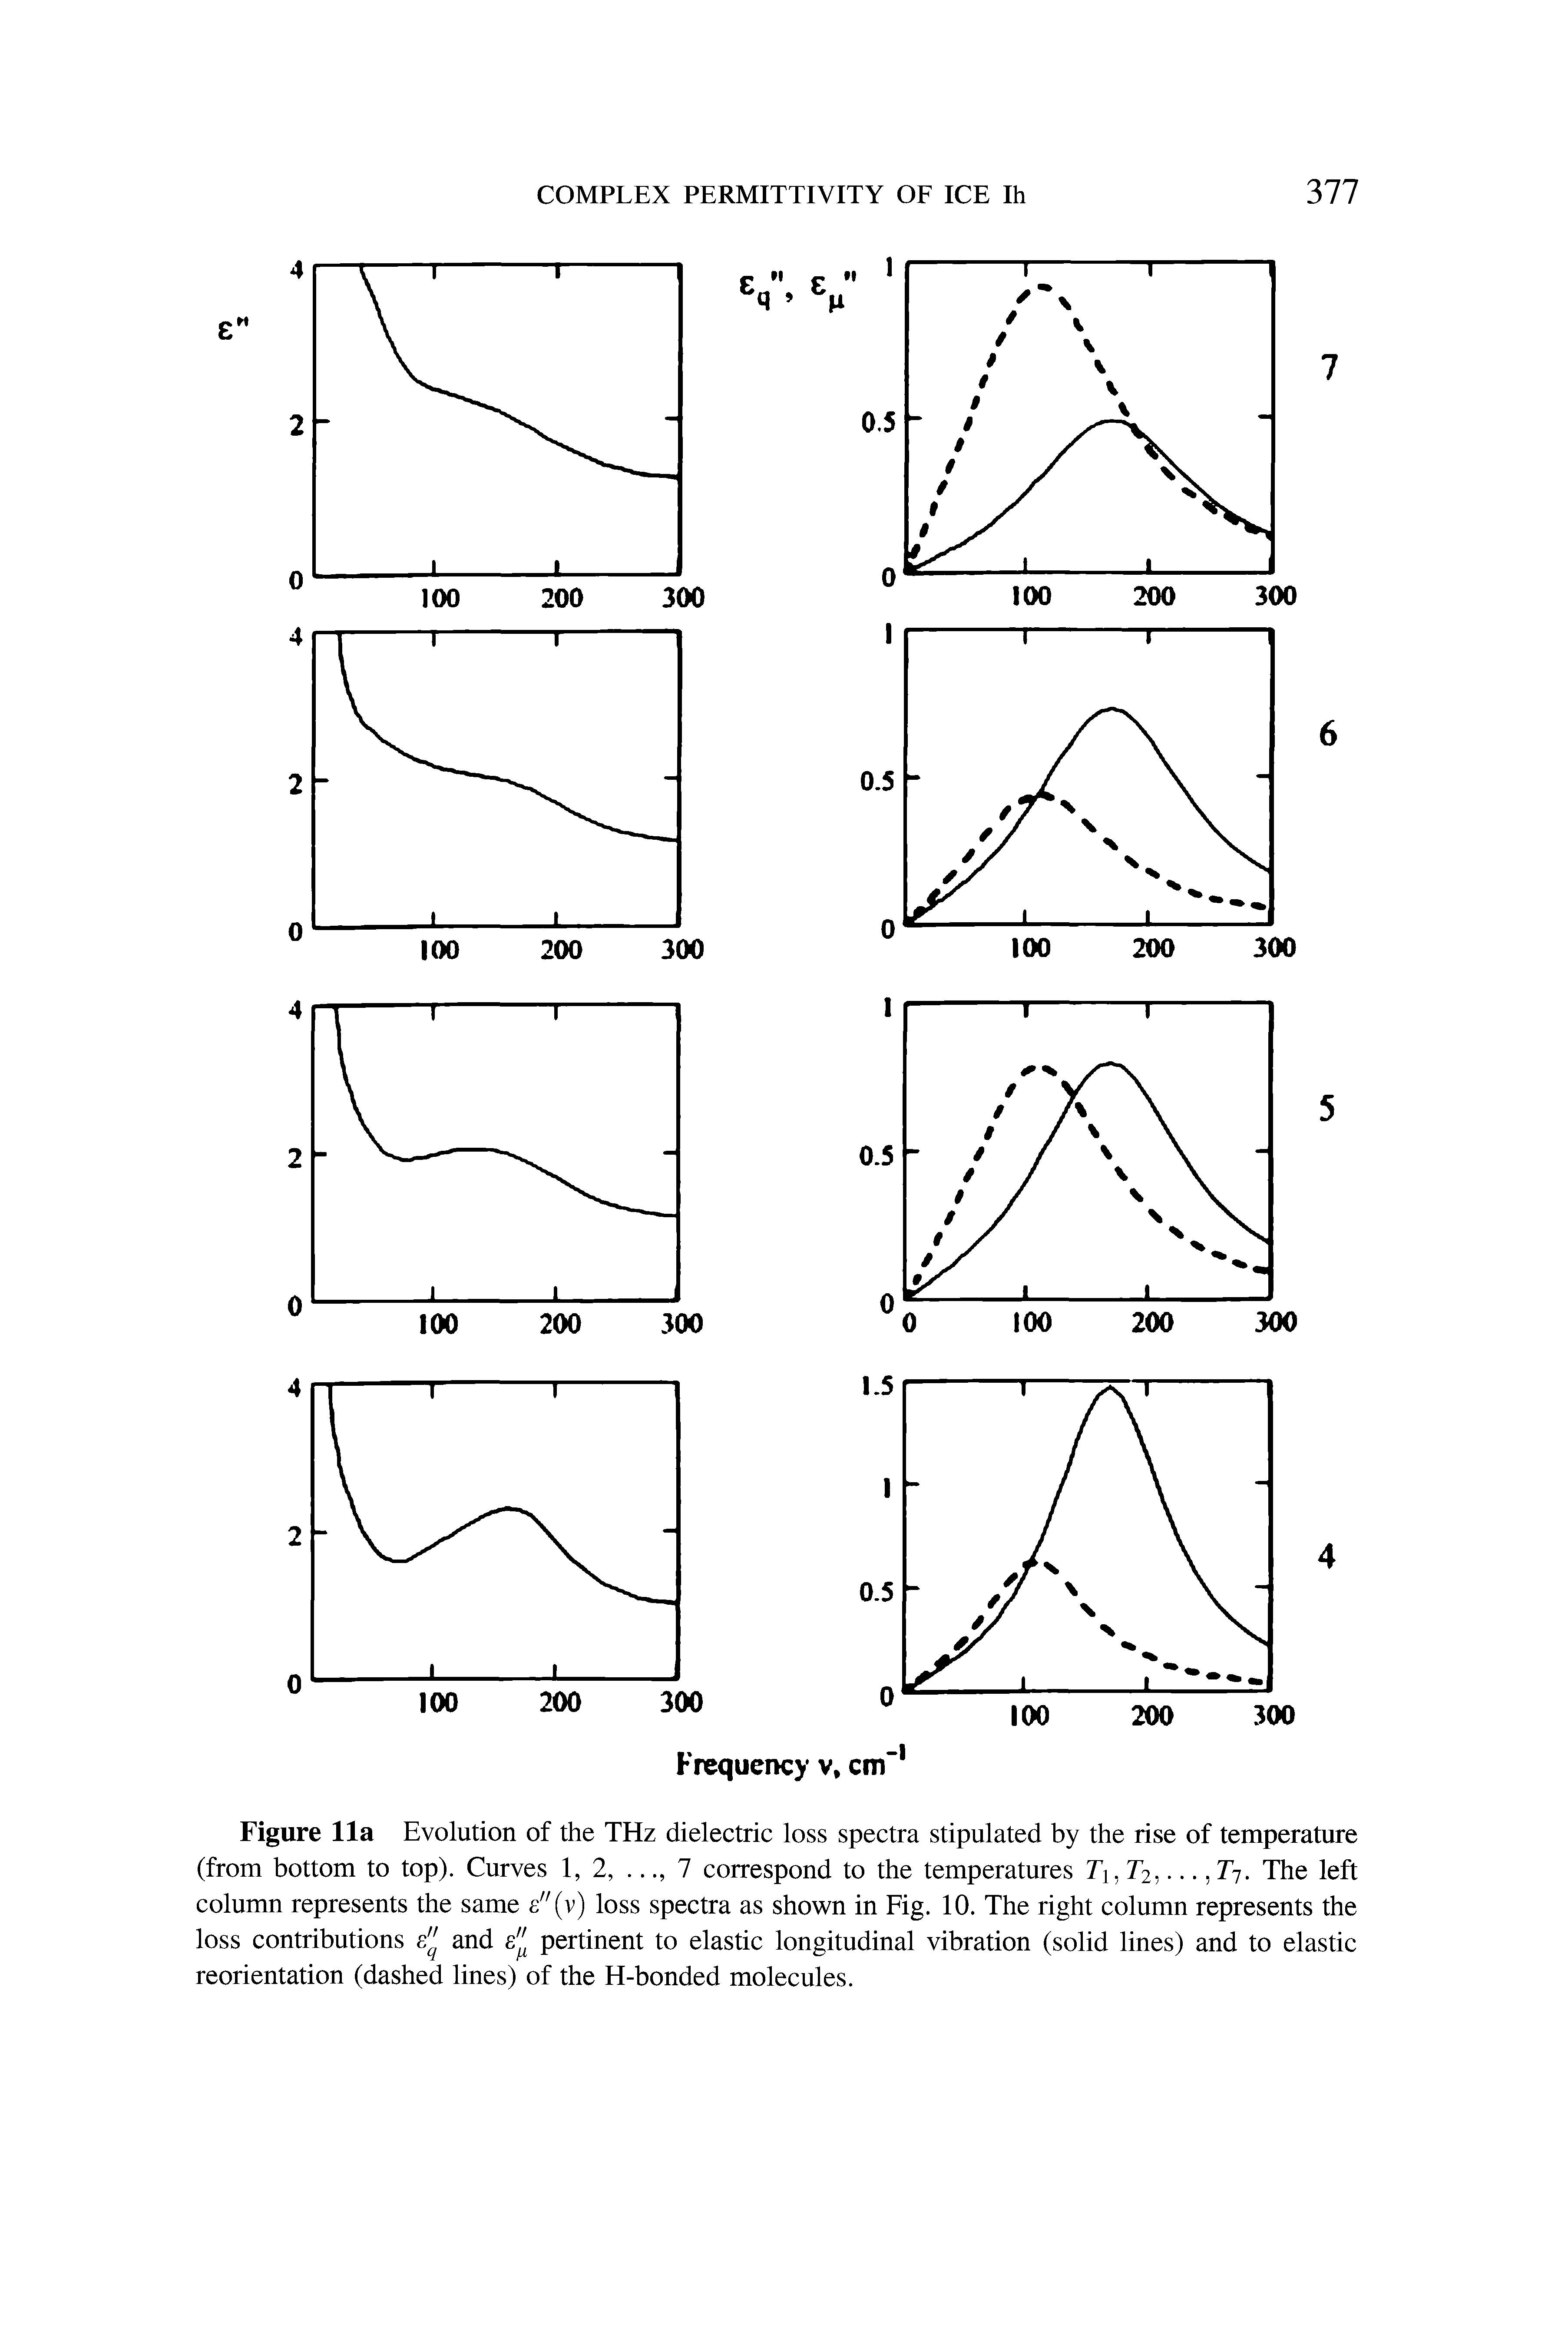 Figure 11a Evolution of the THz dielectric loss spectra stipulated by the rise of temperature (from bottom to top). Curves 1, 2,. .7 correspond to the temperatures 7i, 72,..., T7. The left column represents the same e"(v) loss spectra as shown in Fig. 10. The right column represents the loss contributions e" and e" pertinent to elastic longitudinal vibration (solid lines) and to elastic reorientation (dashed lines) of the H-bonded molecules.